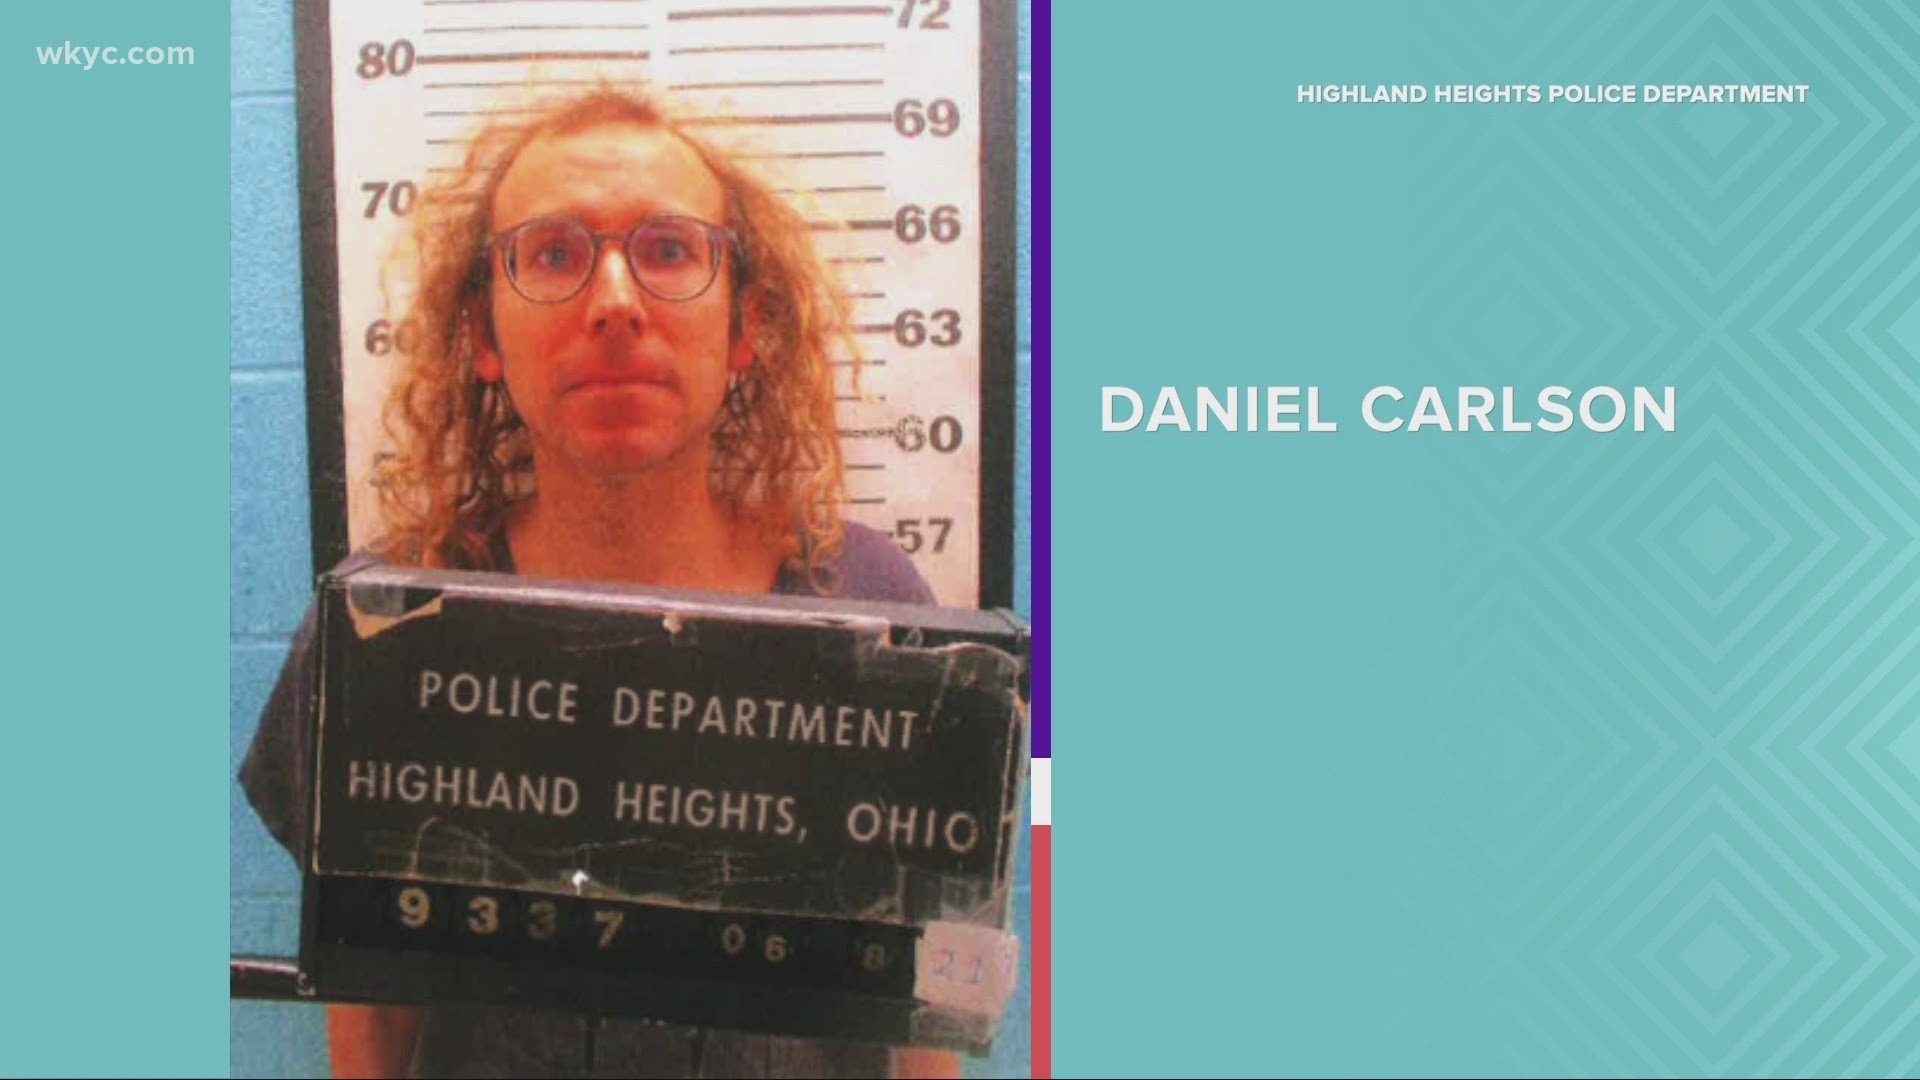 Highland Heights police arrested Daniel Carlson for "Pandering Sexually Oriented Matter" involving a minor. This is a developing story.